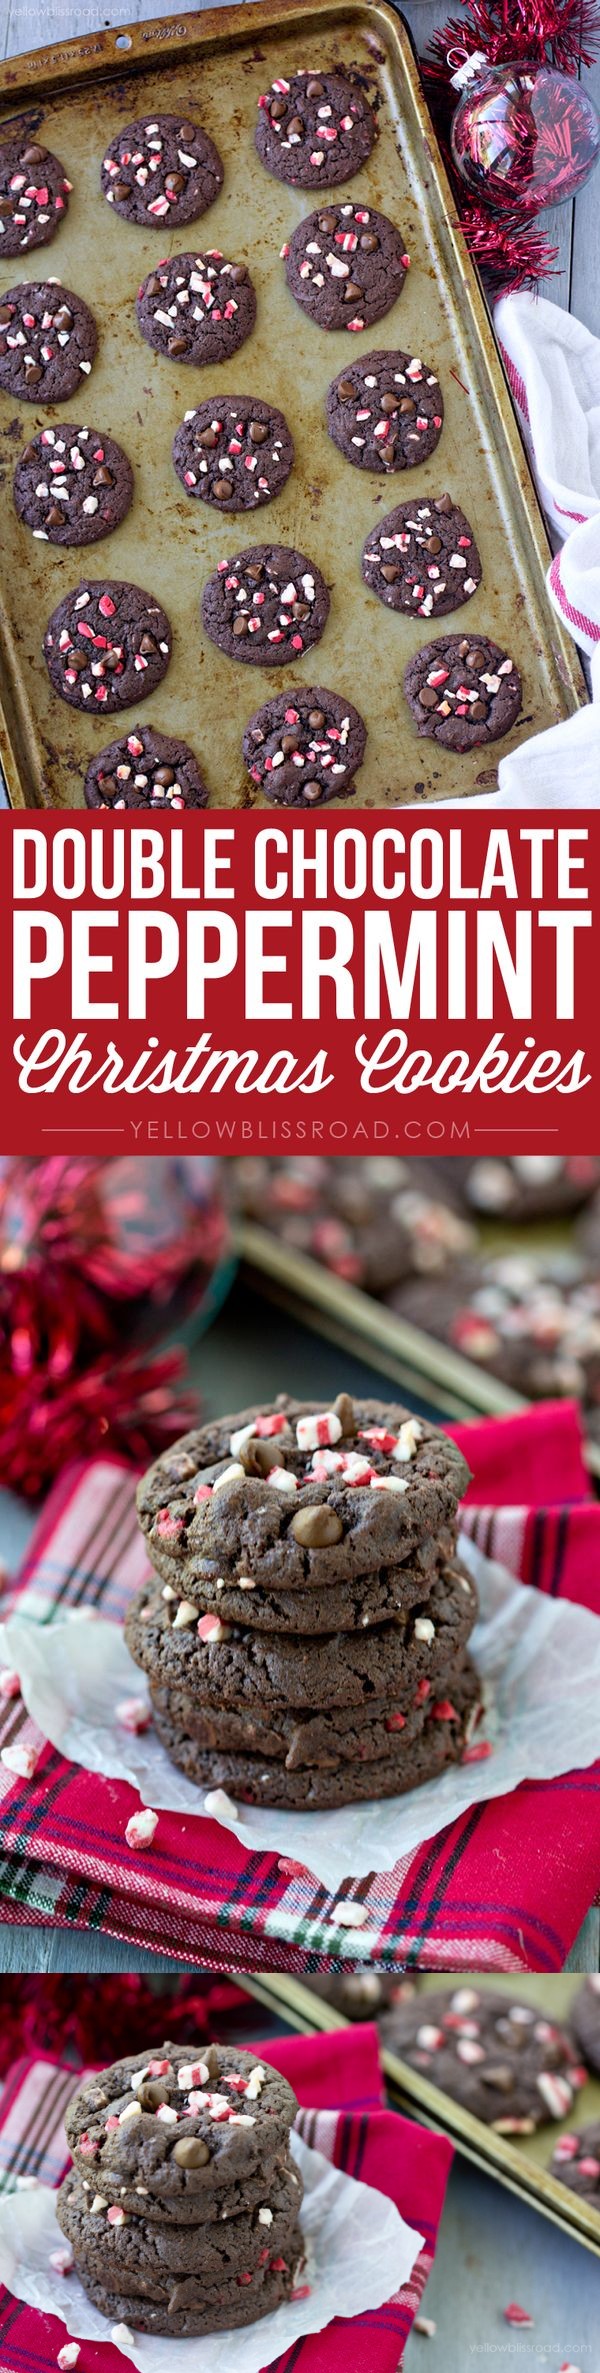 5 Ingredient Double Chocolate Peppermint Cookies